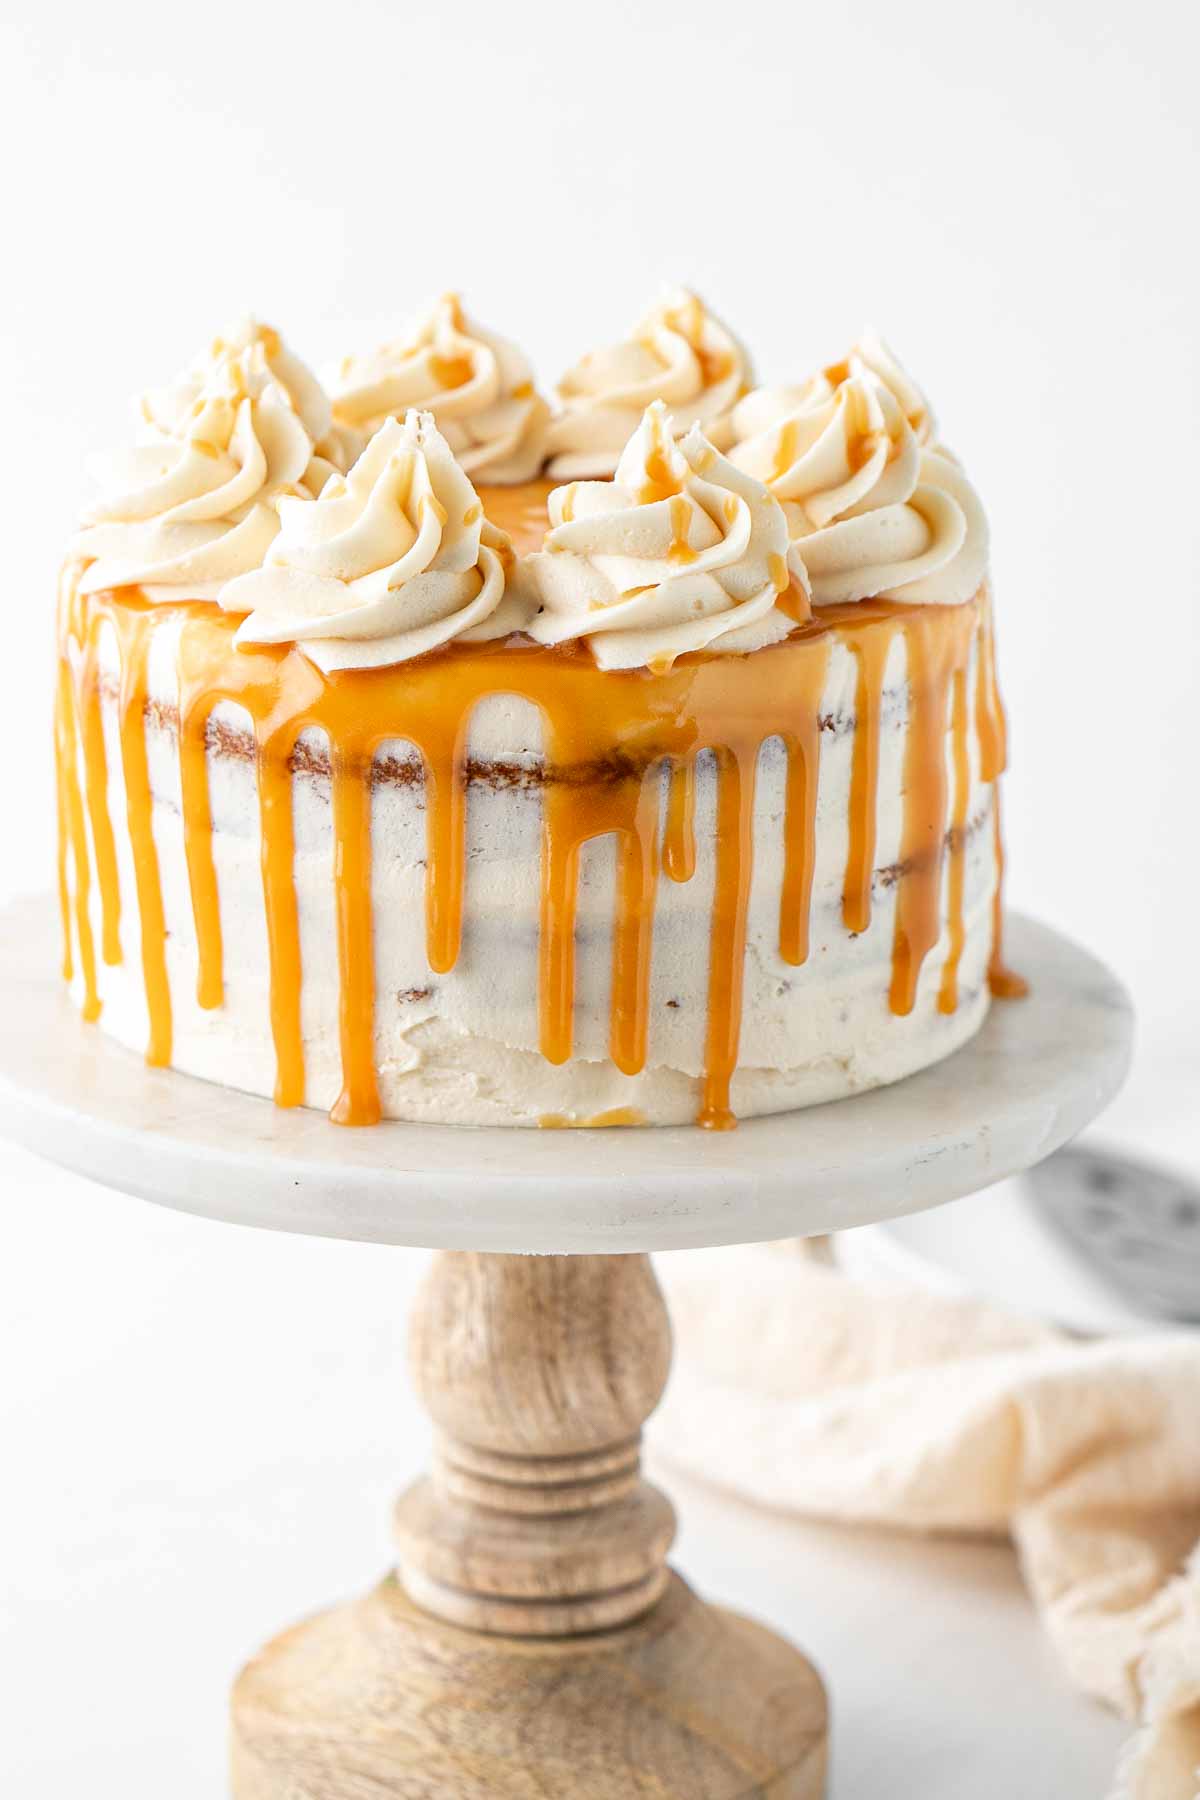 A vegan caramel cake with a caramel drip and swirls of buttercream frosting on top on a cake stand.